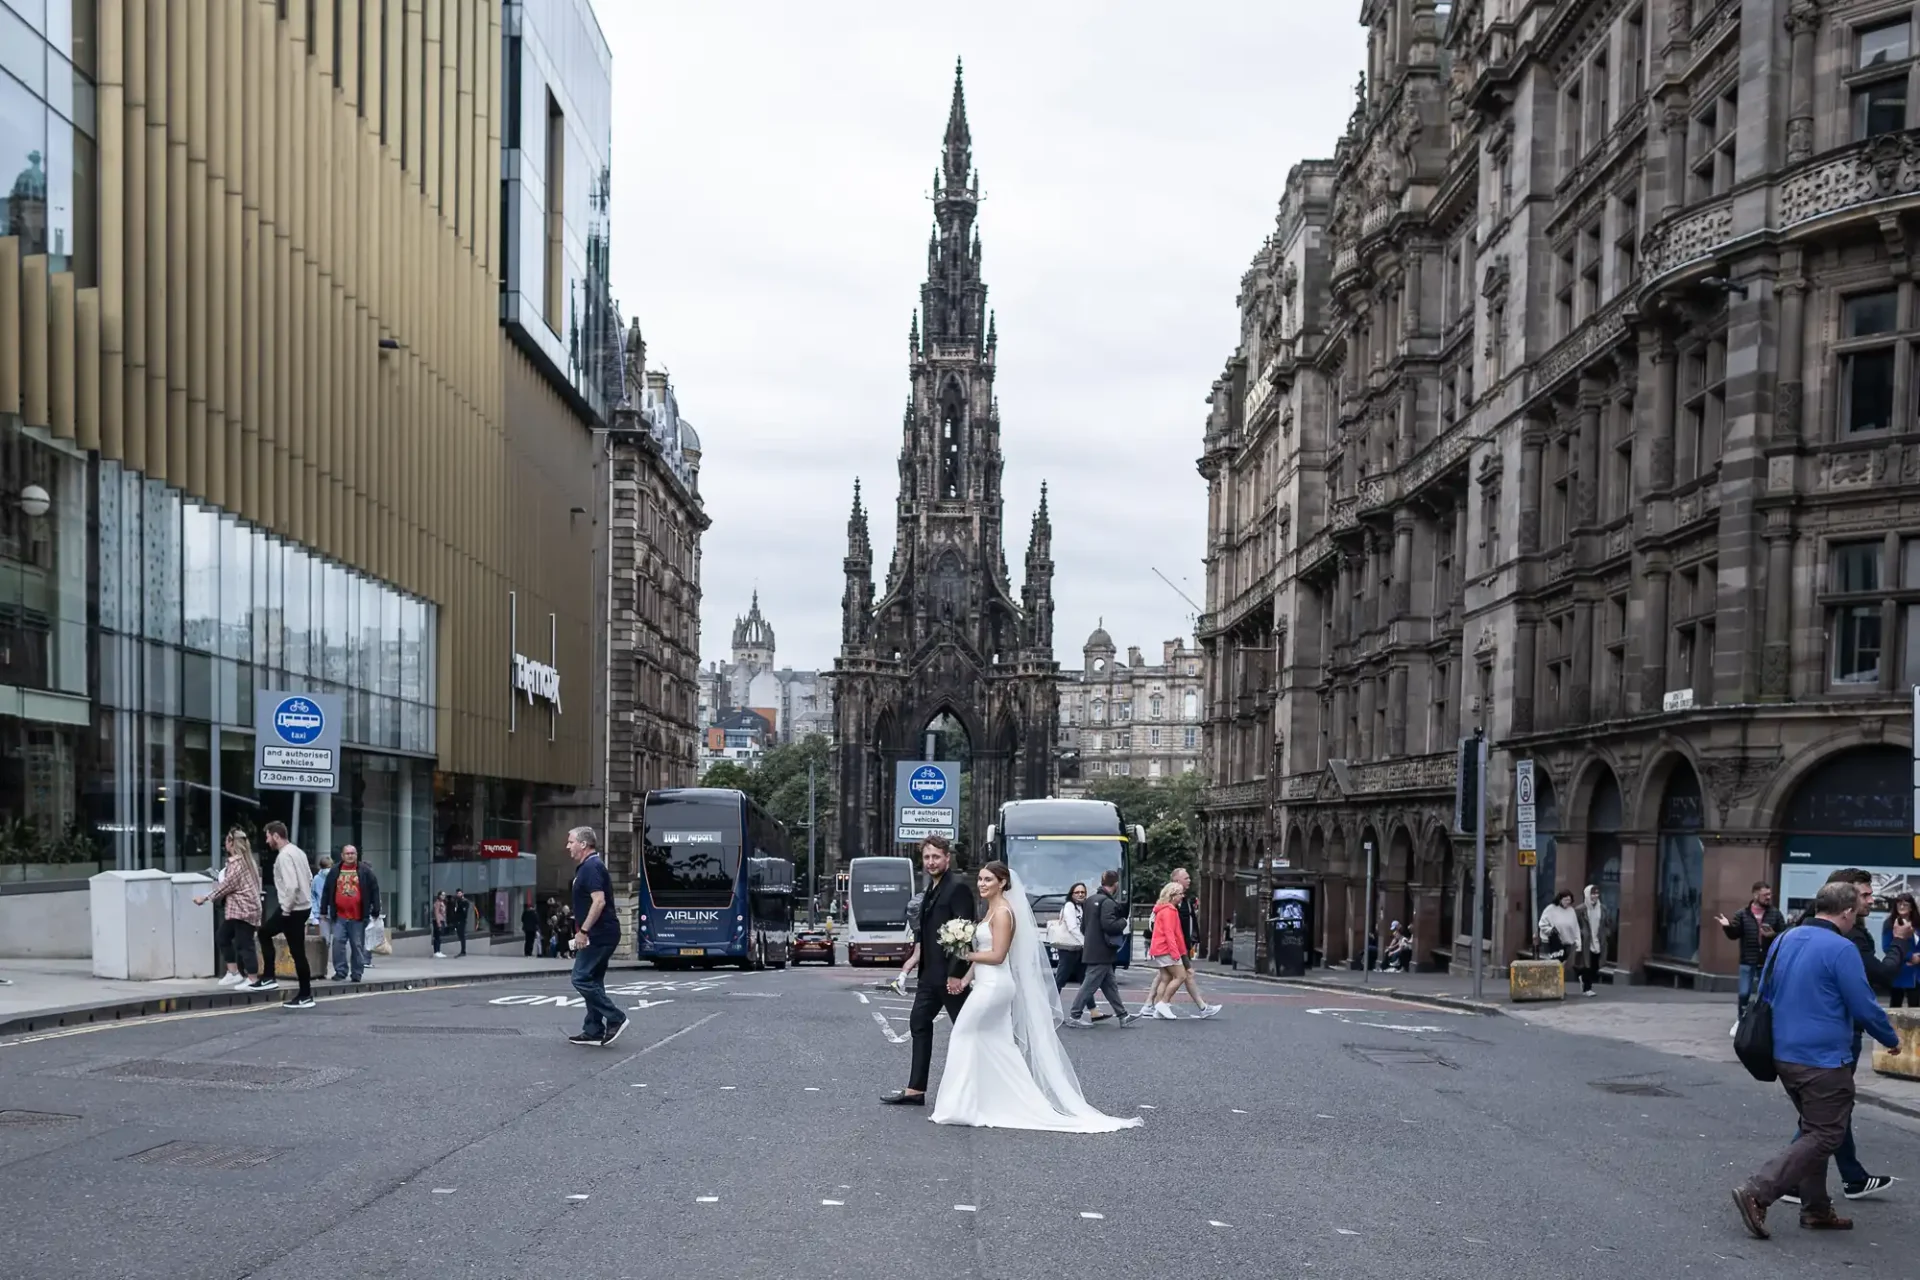 A bride and groom stand in the middle of a busy city street, posing for a photo with the scott monument in the background, surrounded by pedestrians and vehicles.